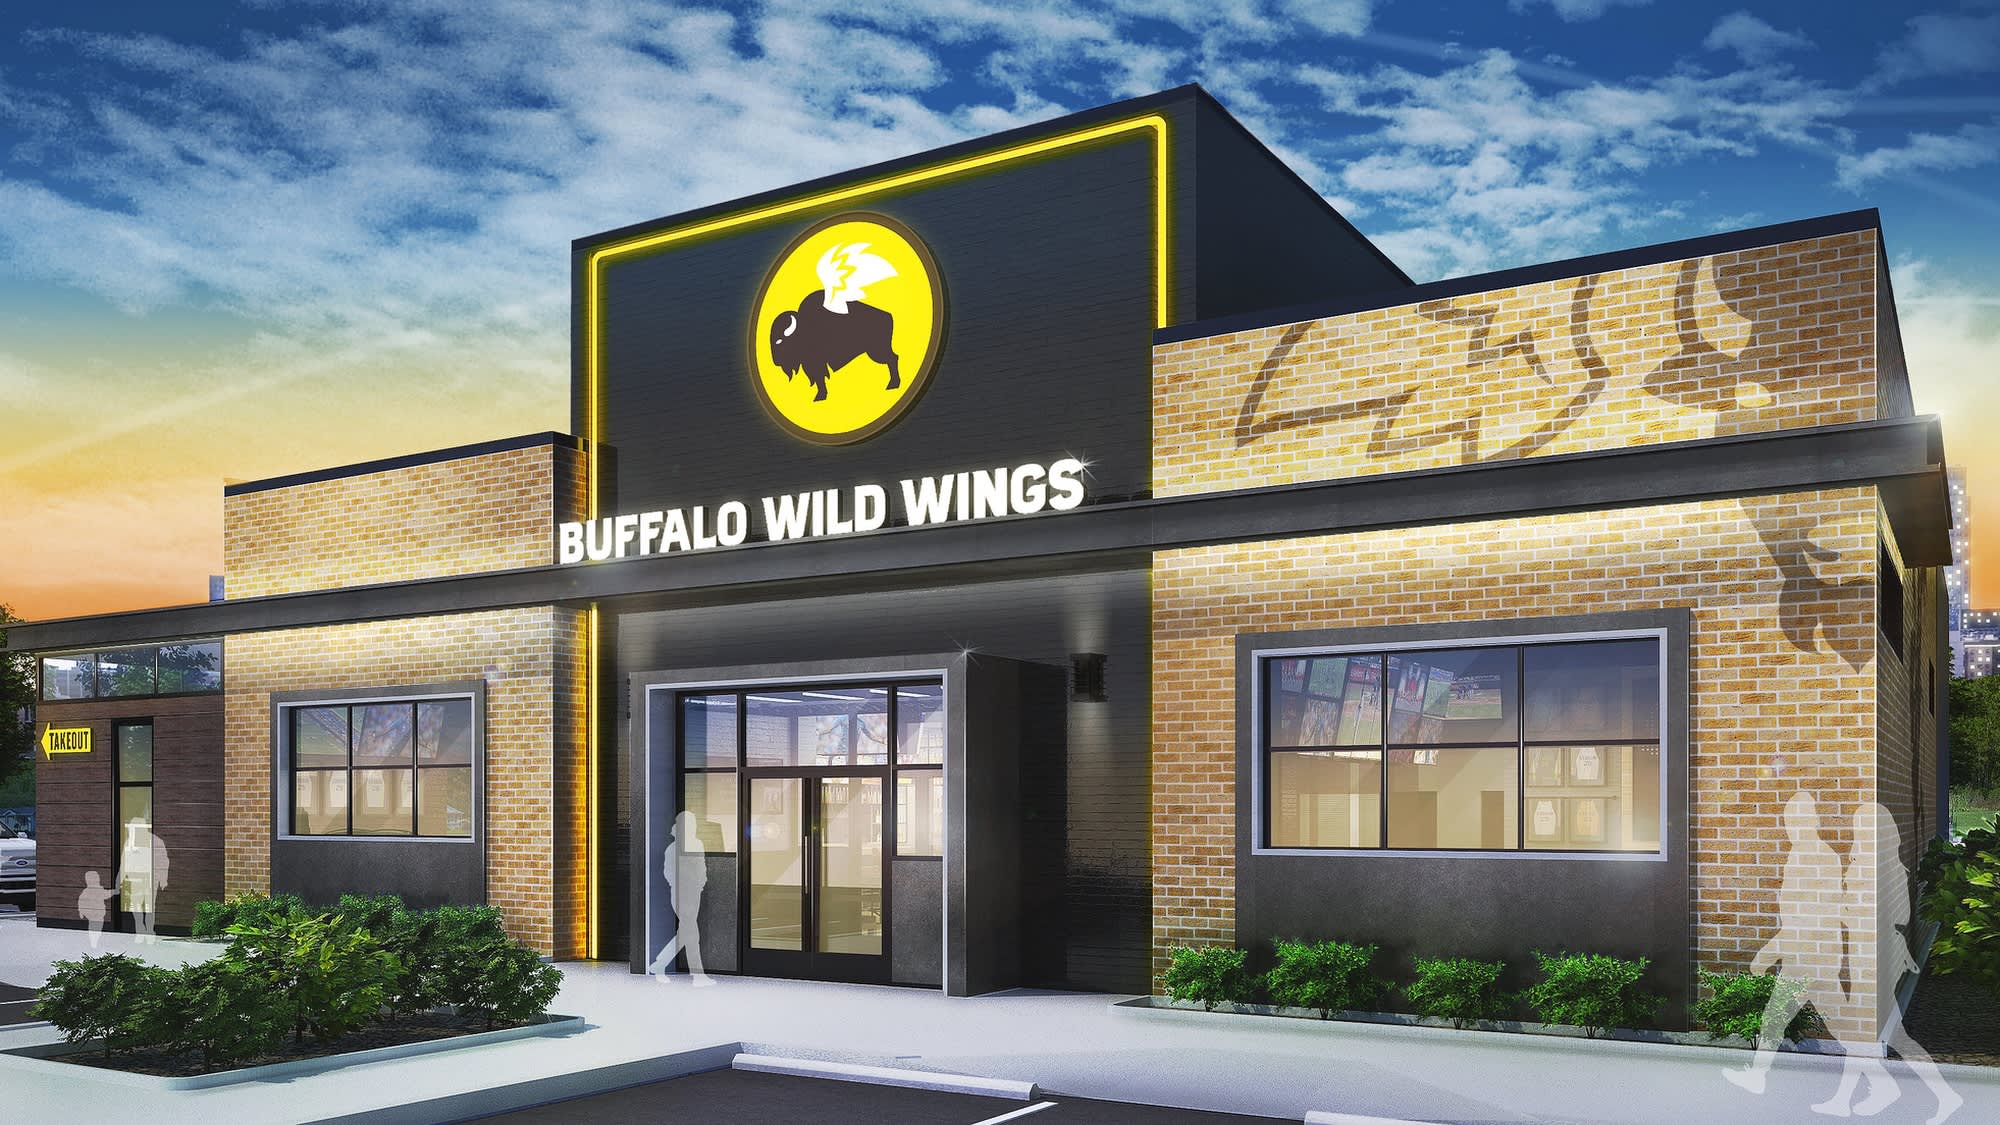 Medic liter dæk Buffalo Wild Wings is getting a major redesign. Here's a look inside